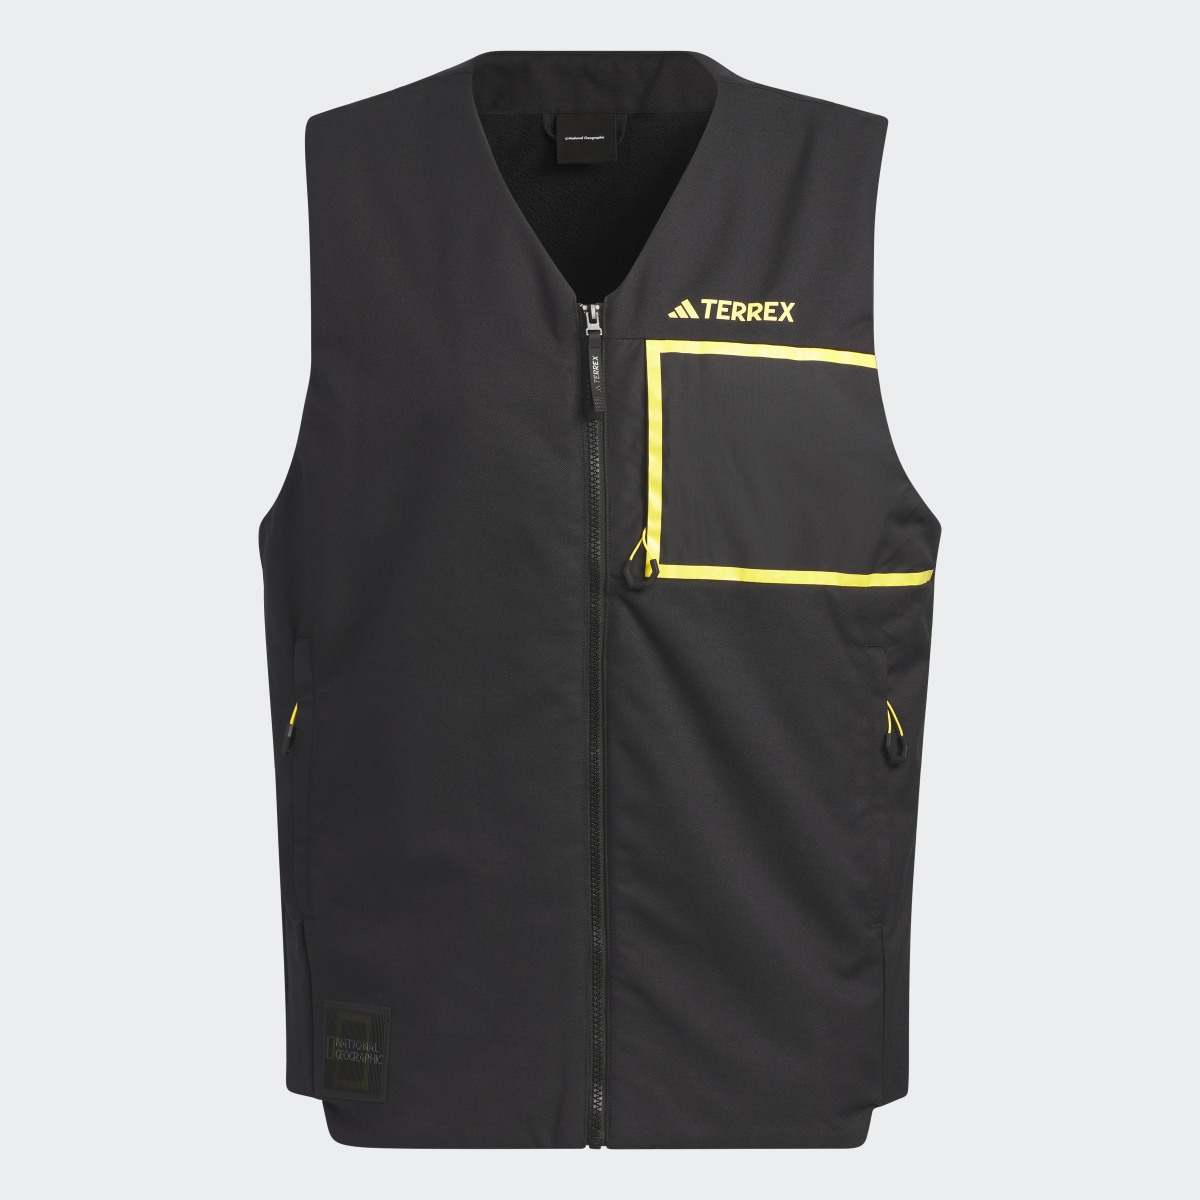 Adidas National Geographic Fleece-Lined Vest. 5